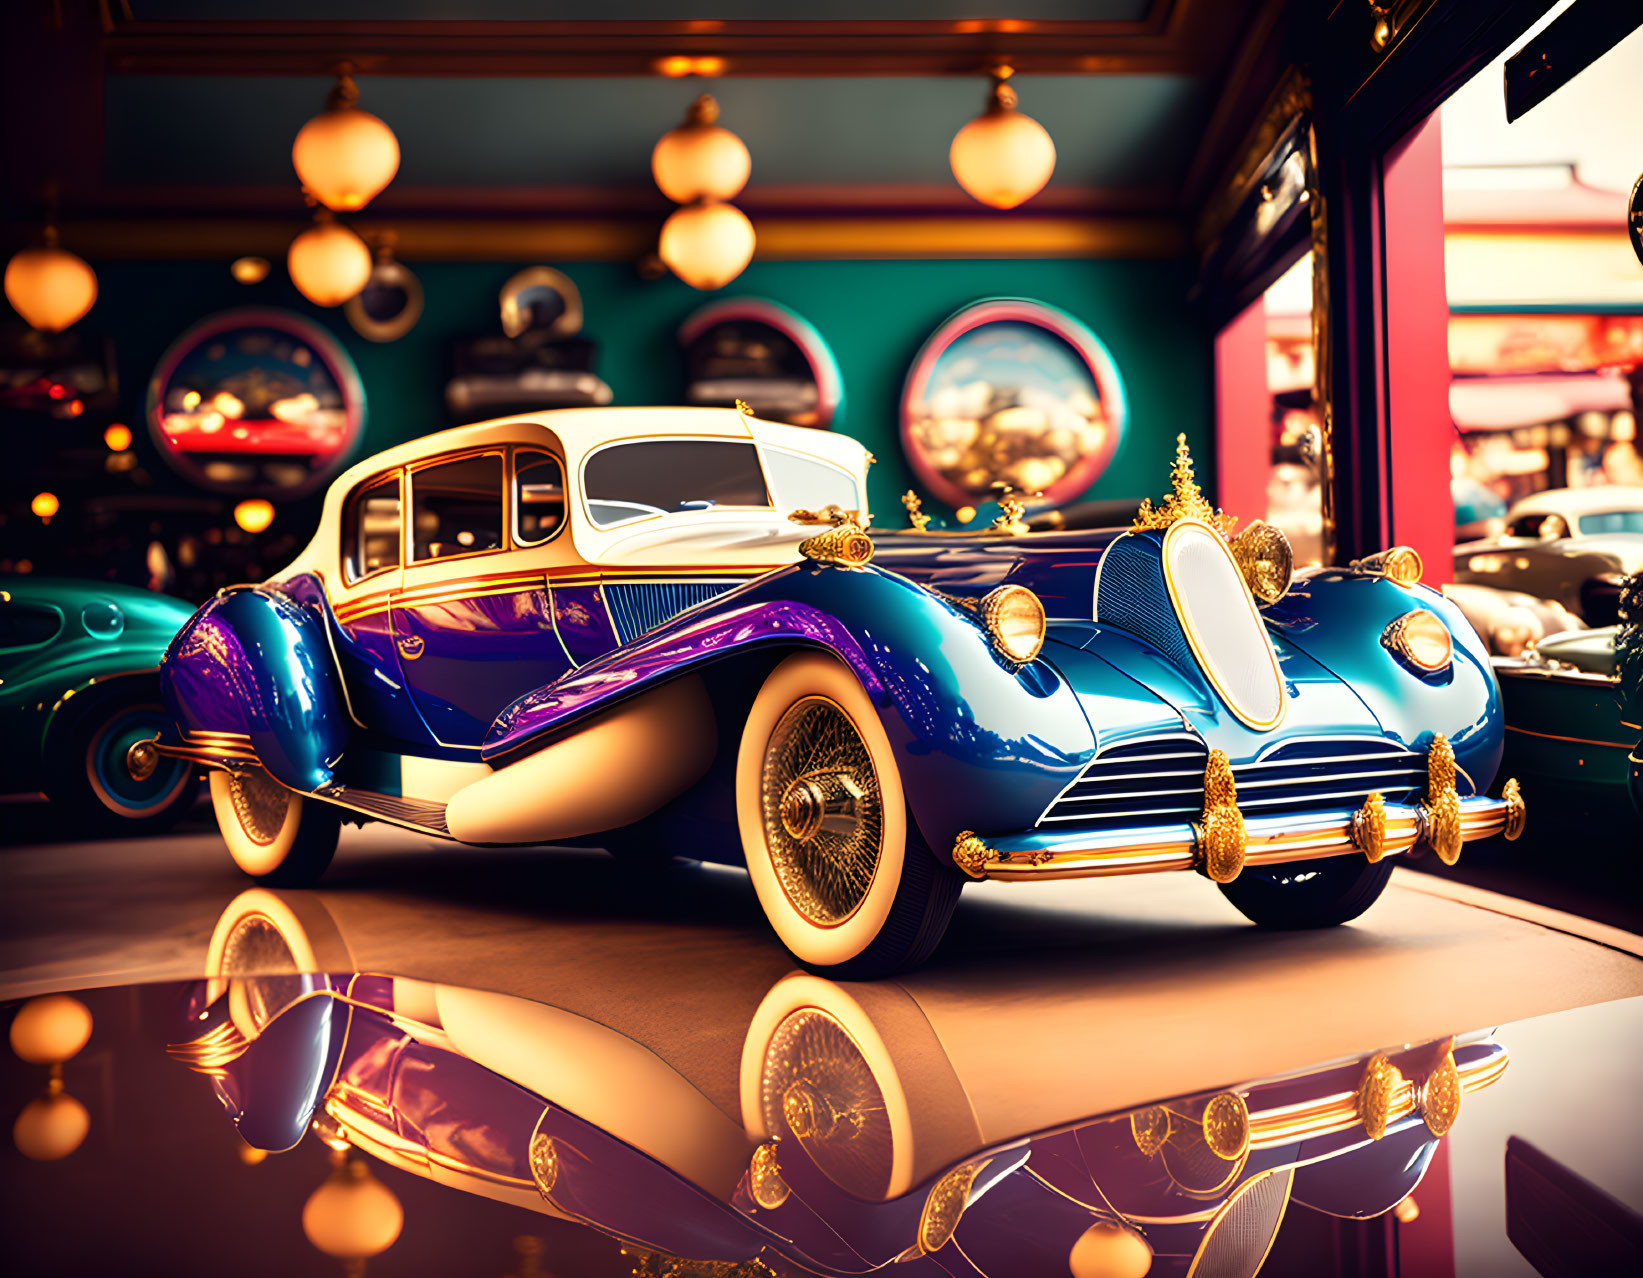 Vintage Blue Car with Golden Accents in Showroom Setting